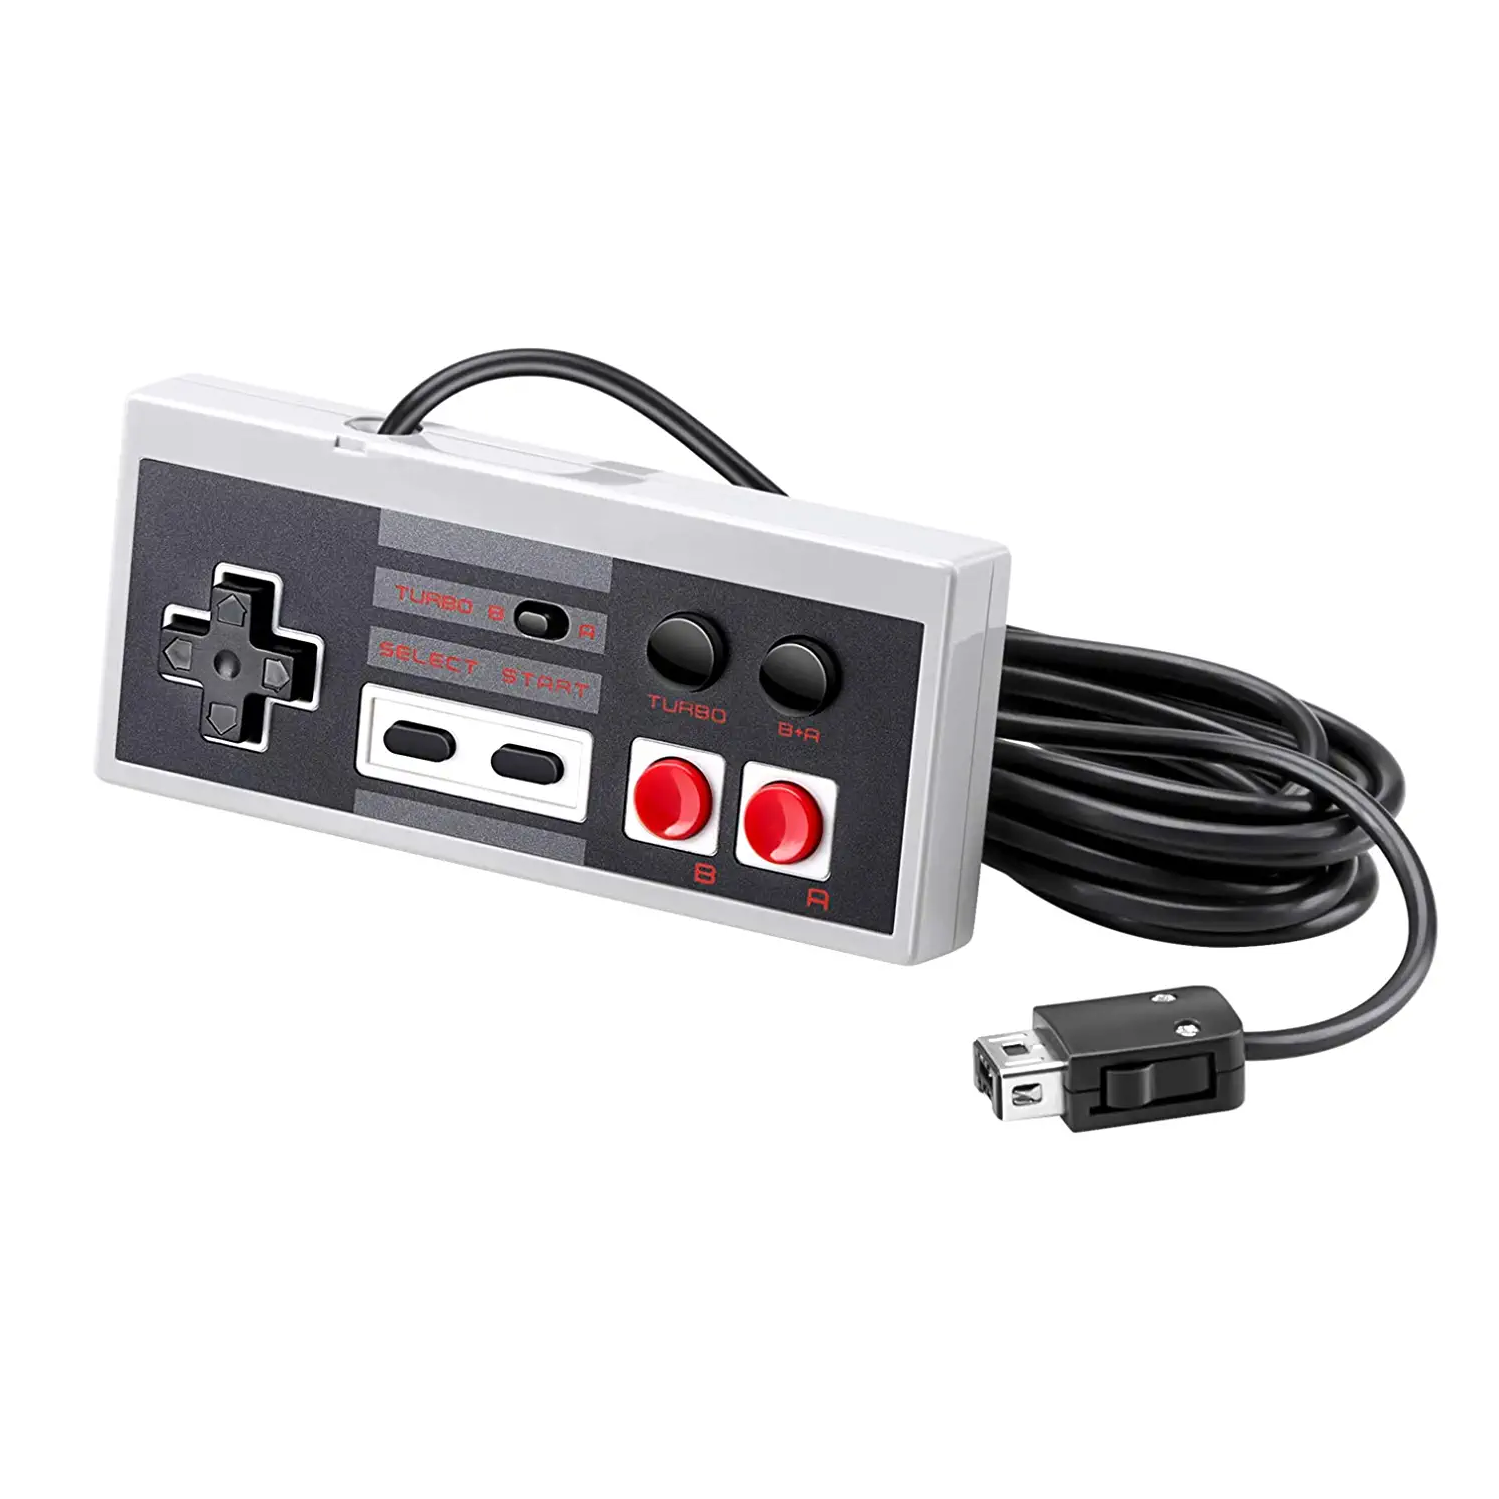 NES Classic Edition Mini Controller [Turbo Edition] Rapid Buttons for Nintendo Gaming System [Nintendo NES] (Wired)